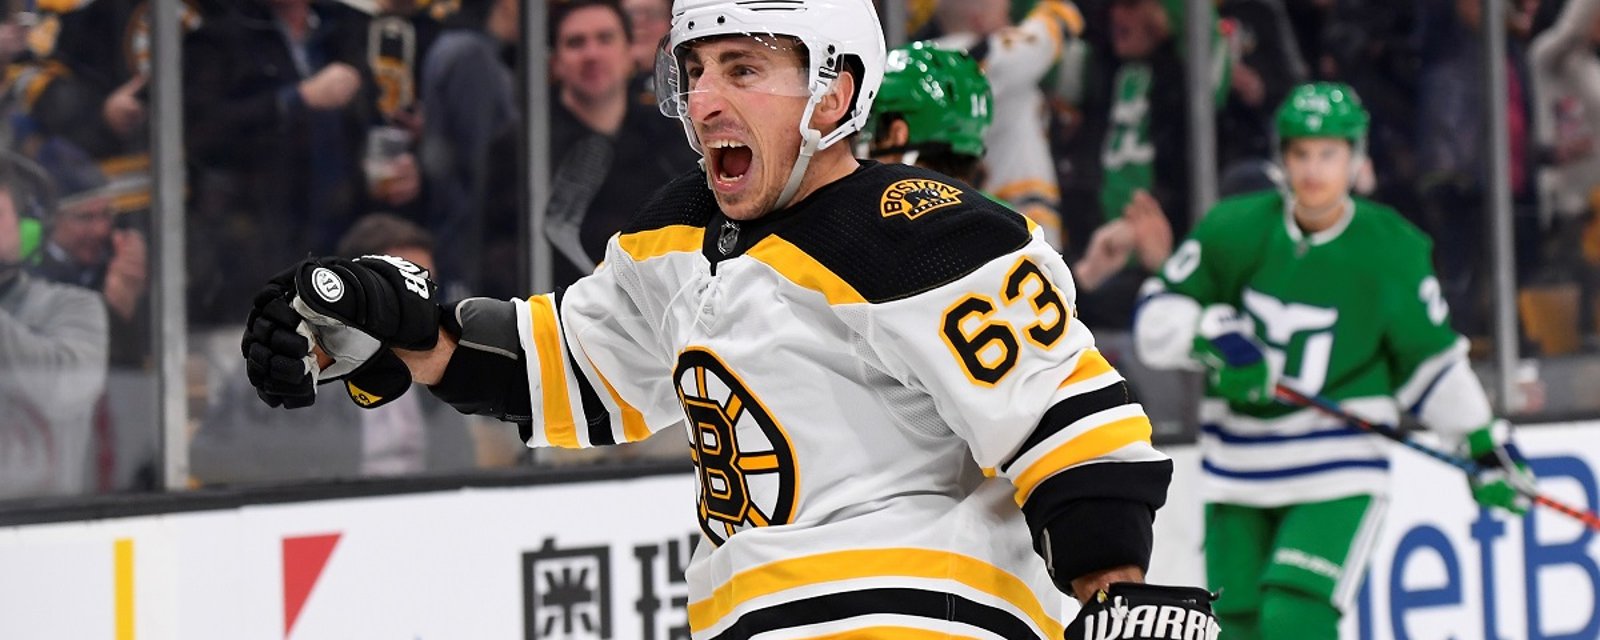 Marchand scores the Bruins first of the season on a penalty shot!